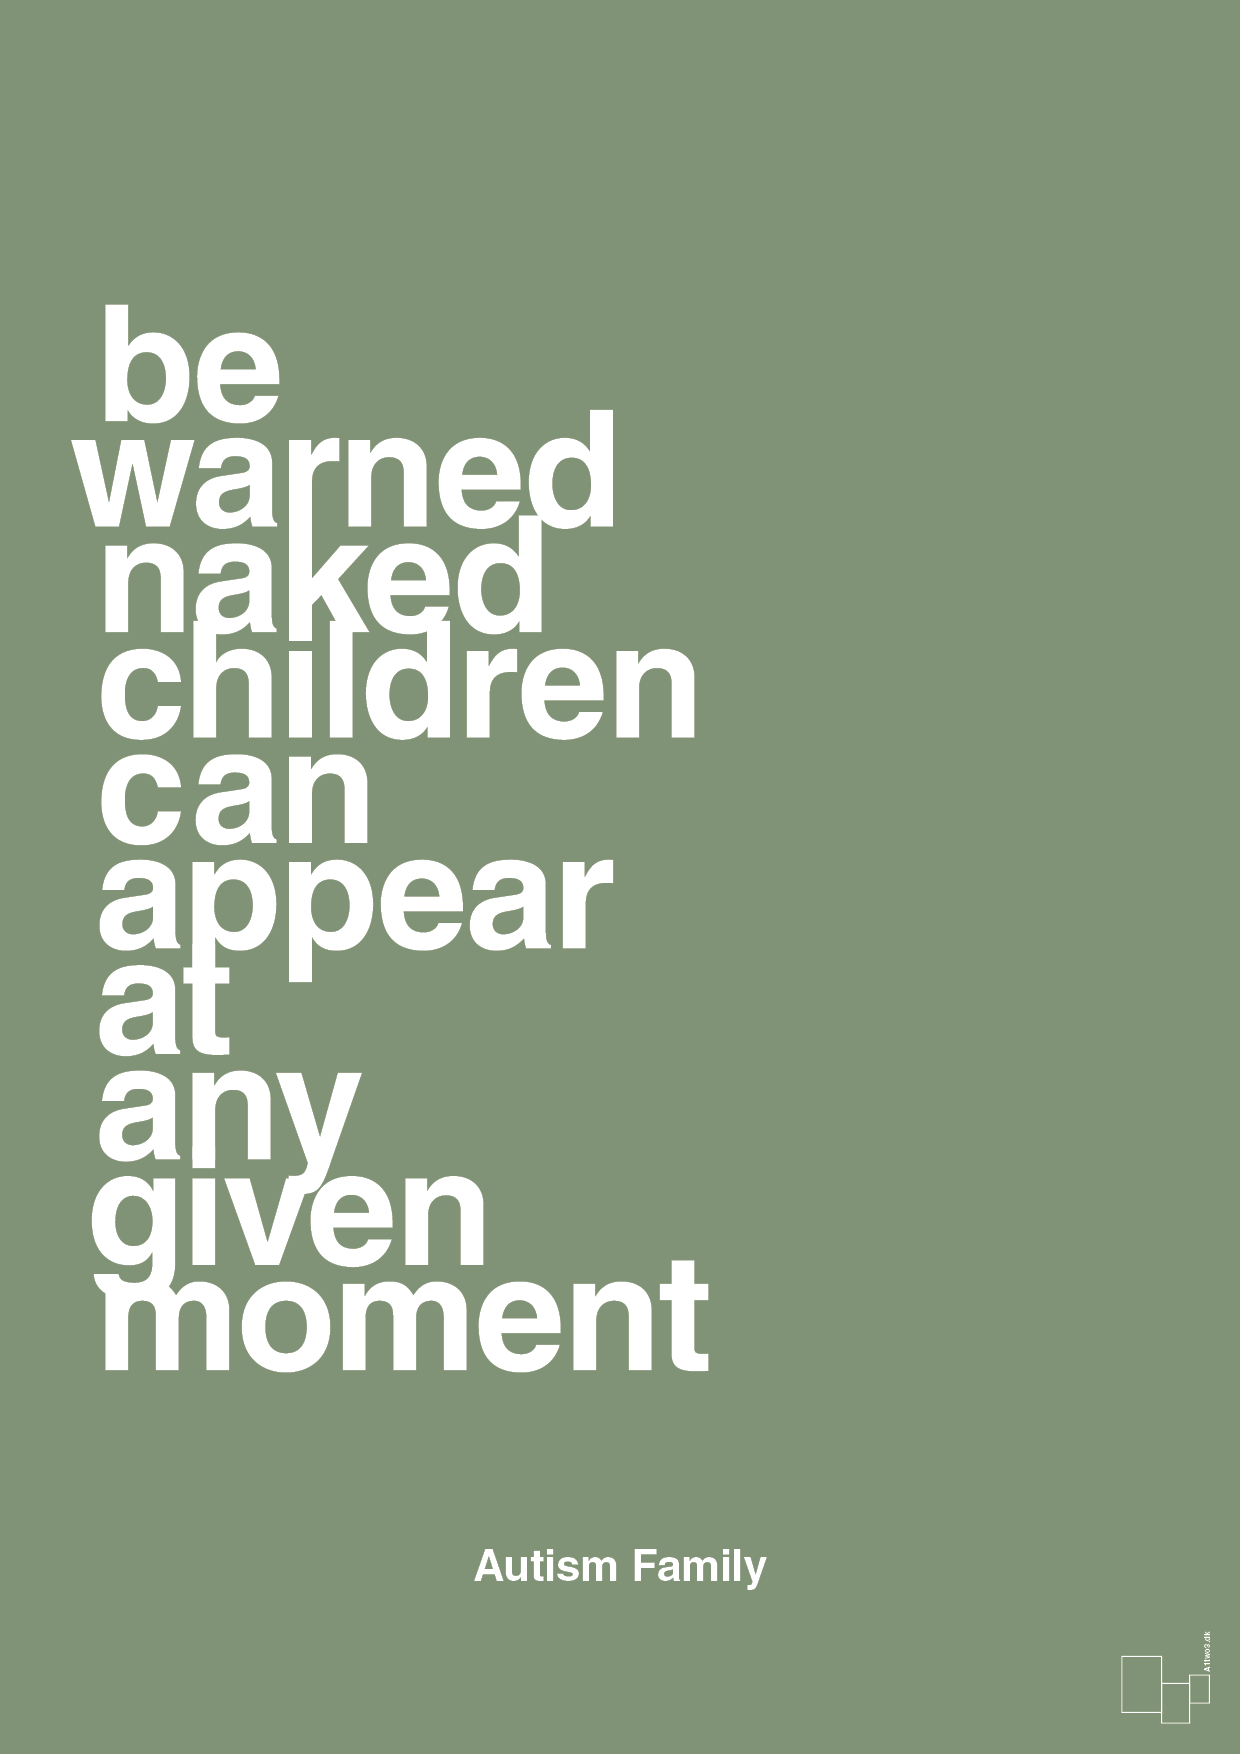 be warned naked children can appear at any given moment - Plakat med Samfund i Jade